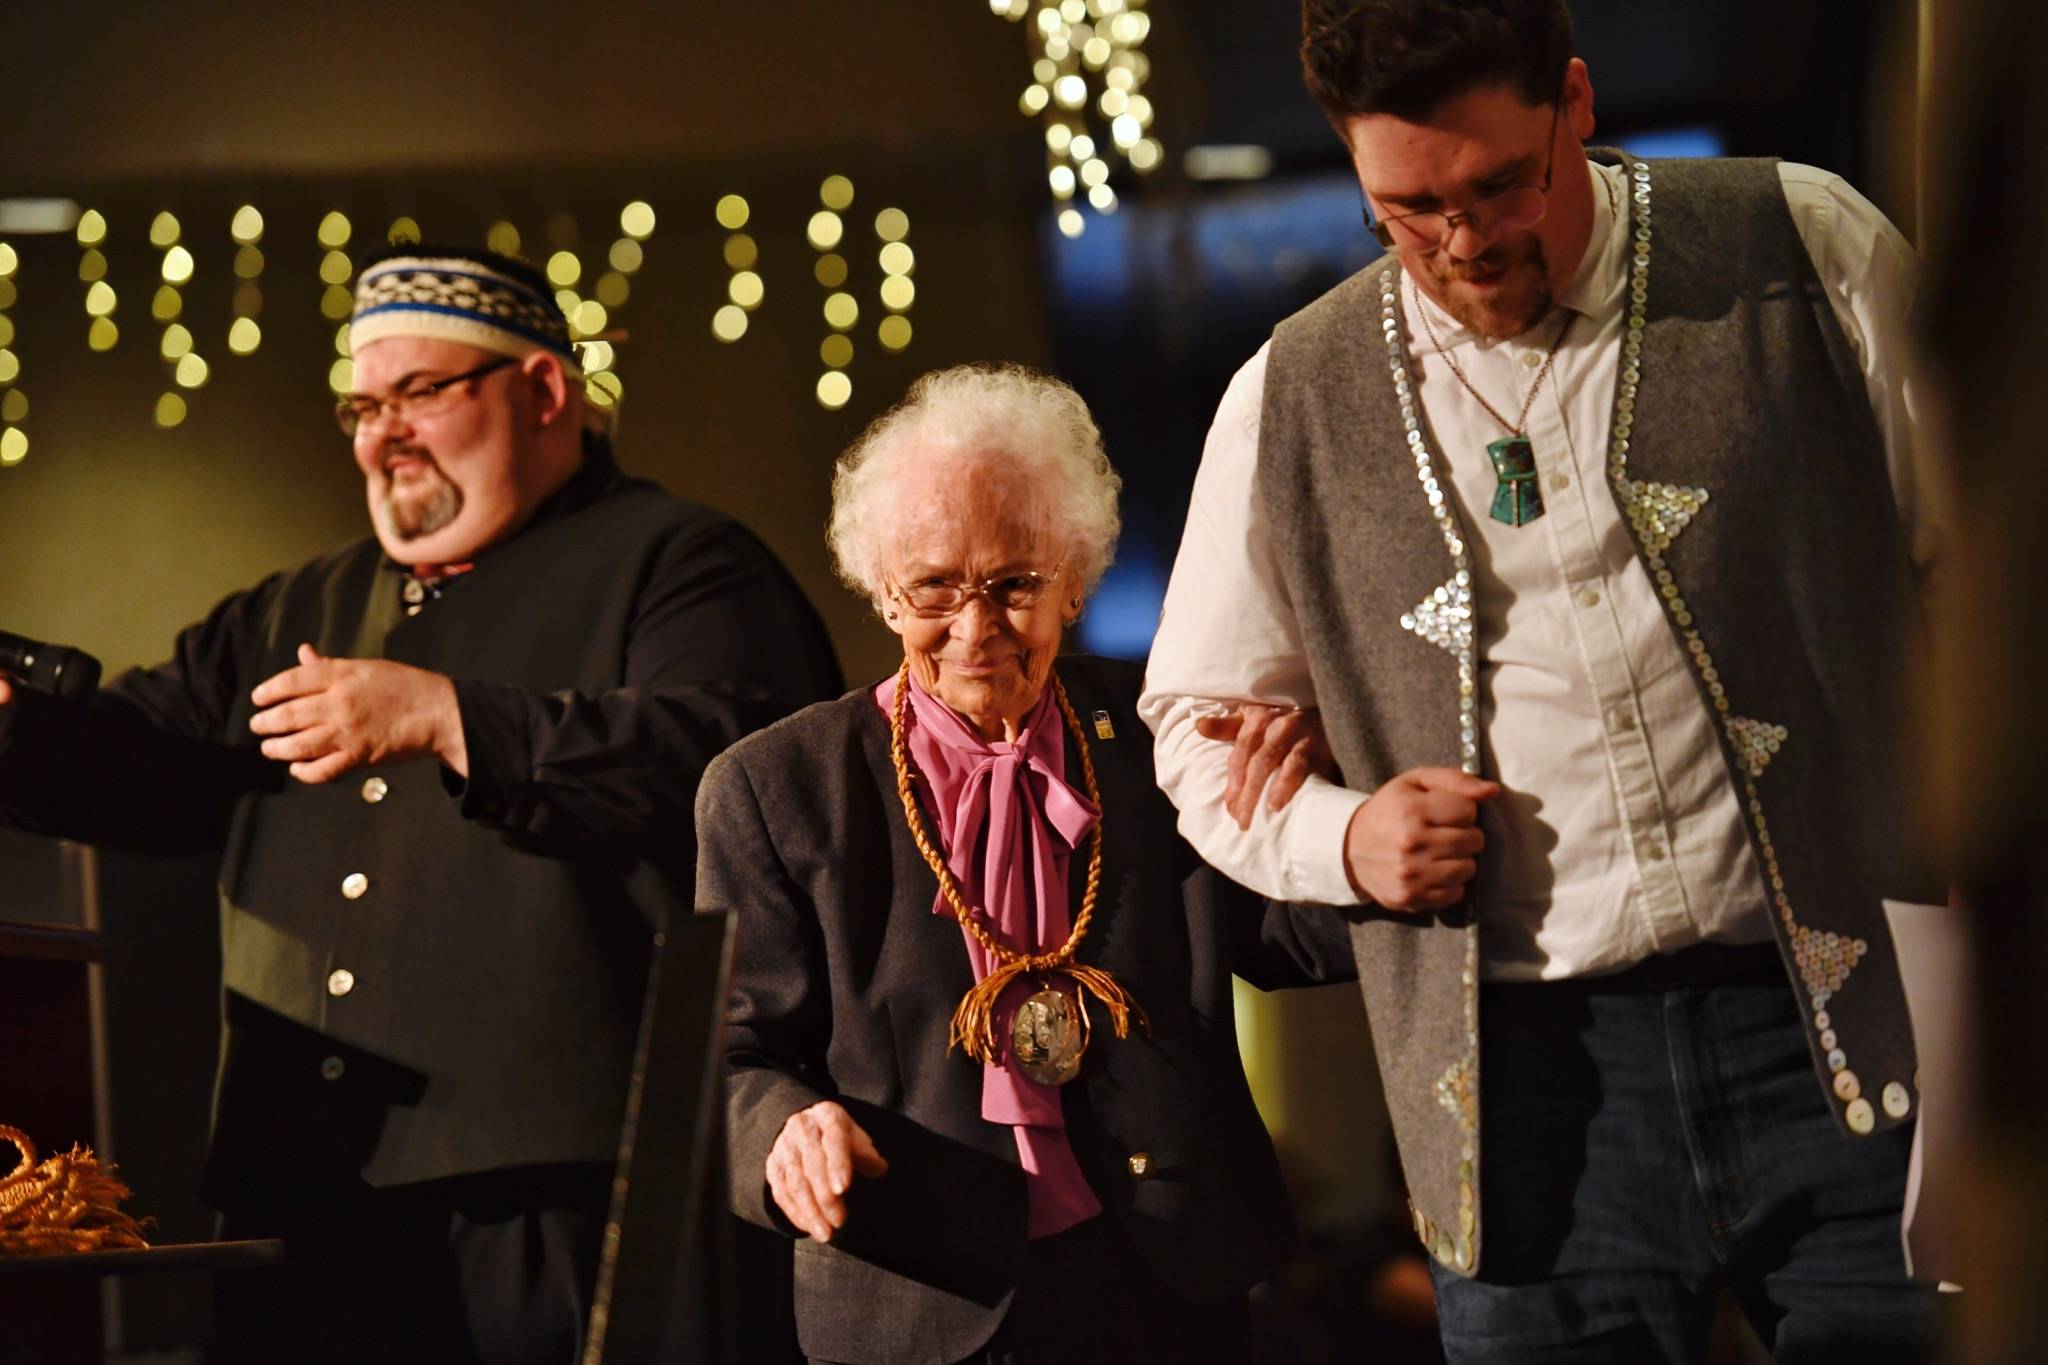 Marie Olson (Kaayistaan) is escorted off the stage by Master of Ceremonies David R. Boxley (Gyibaawm Laxha), right, after she received the President’s Life Achievement Award from Tlingit & Haida President Chalyee Éesh Richard Peterson during the President’s Award Banquet and Language Fundraiser at the Elizabeth Peratrovich Hall on Friday, April 12, 2019. (Michael Penn | Juneau Empire)